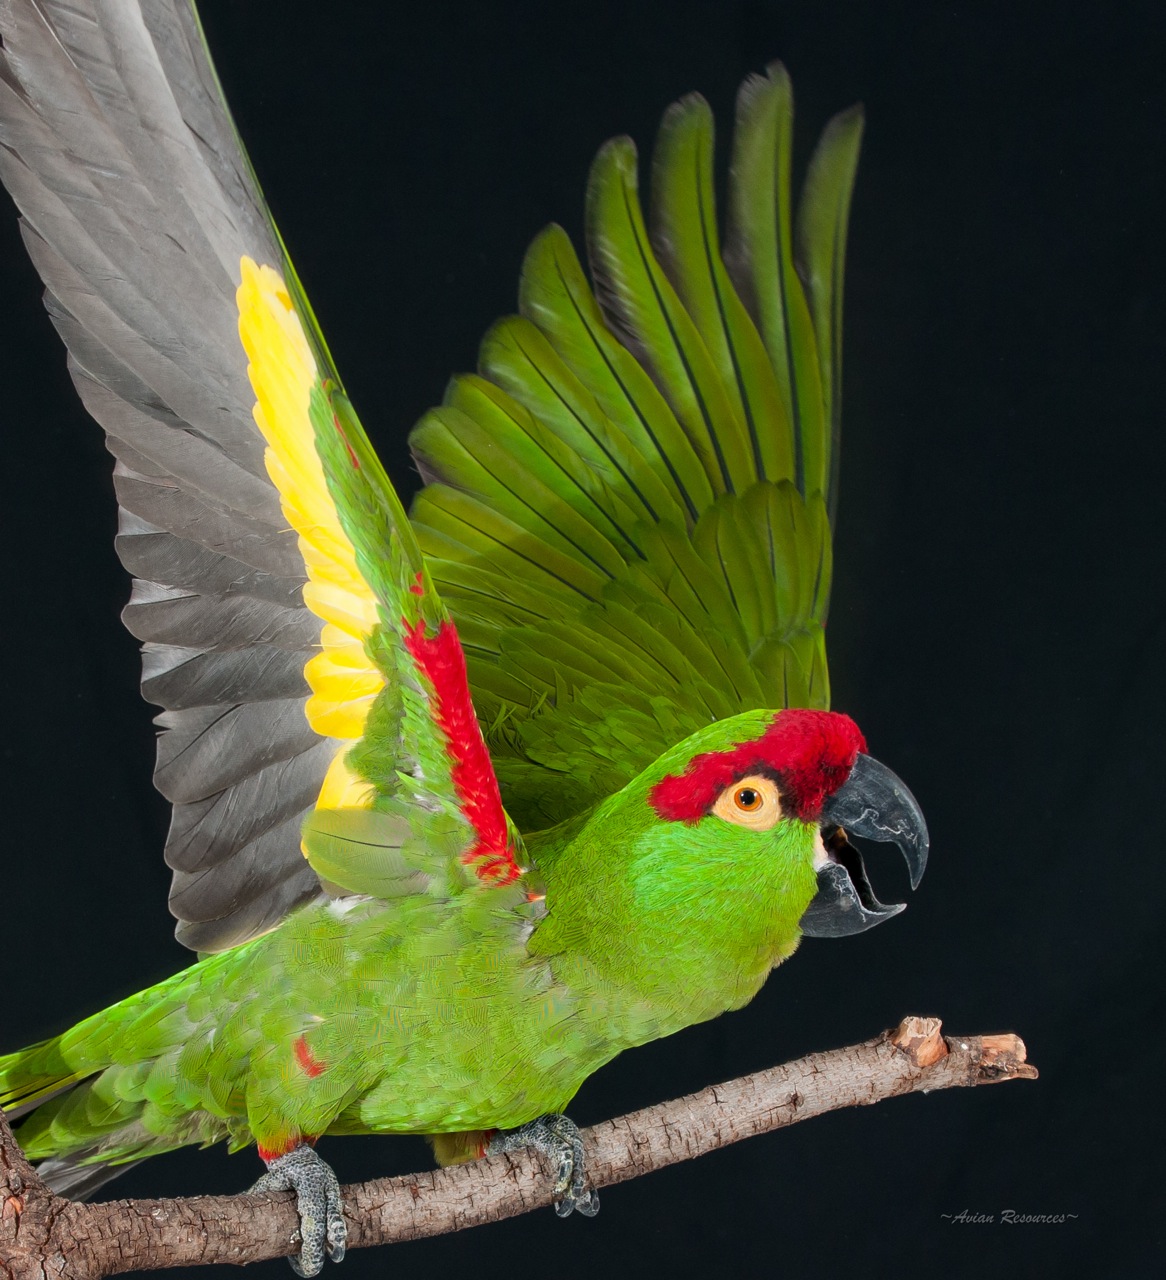 Thick-billed Parrot Conservation in the USA: Exploring the options